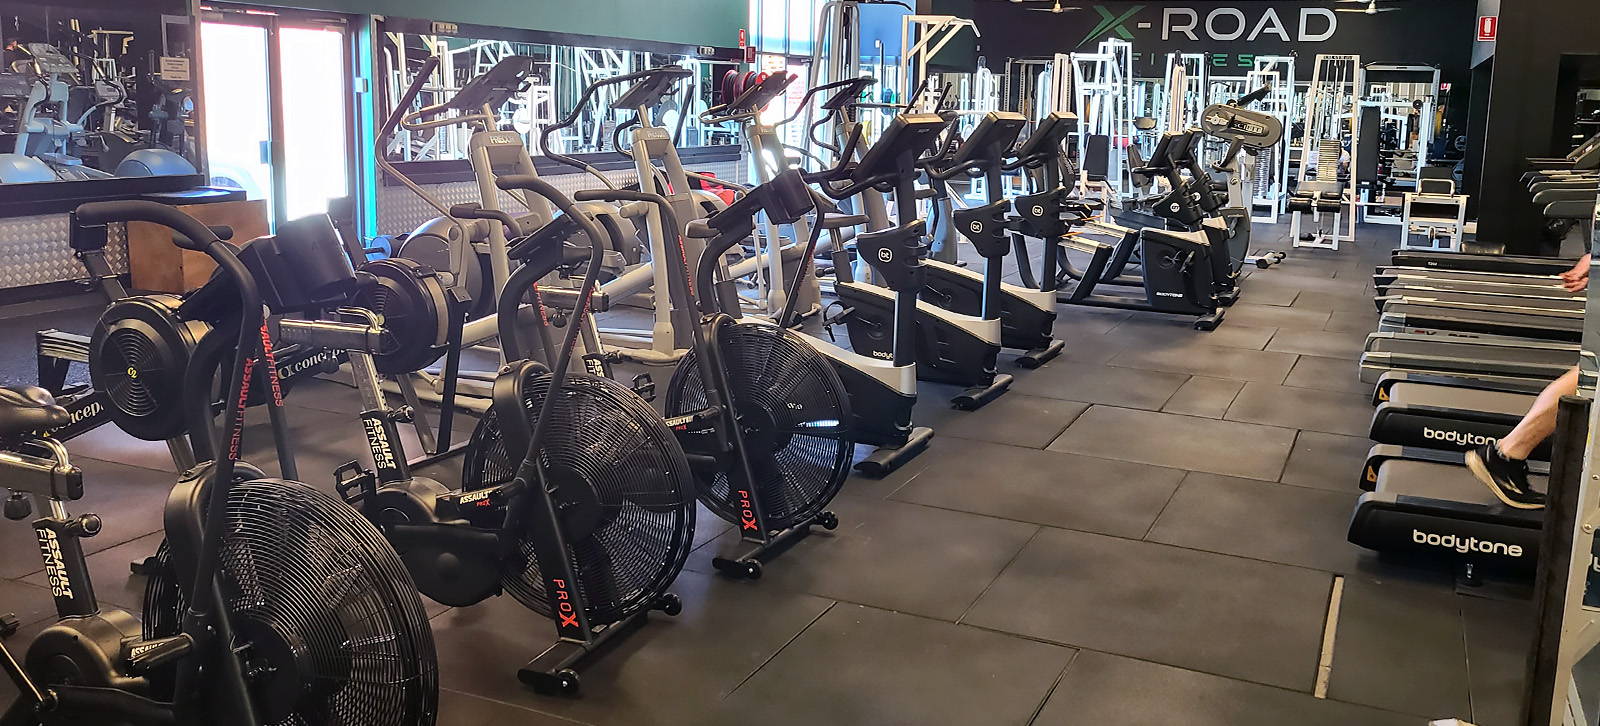 Commercial Gym Fit Oit - Spacious gym interior with a variety of modern cardio equipment including treadmills, rowing machines, and stationary bikes